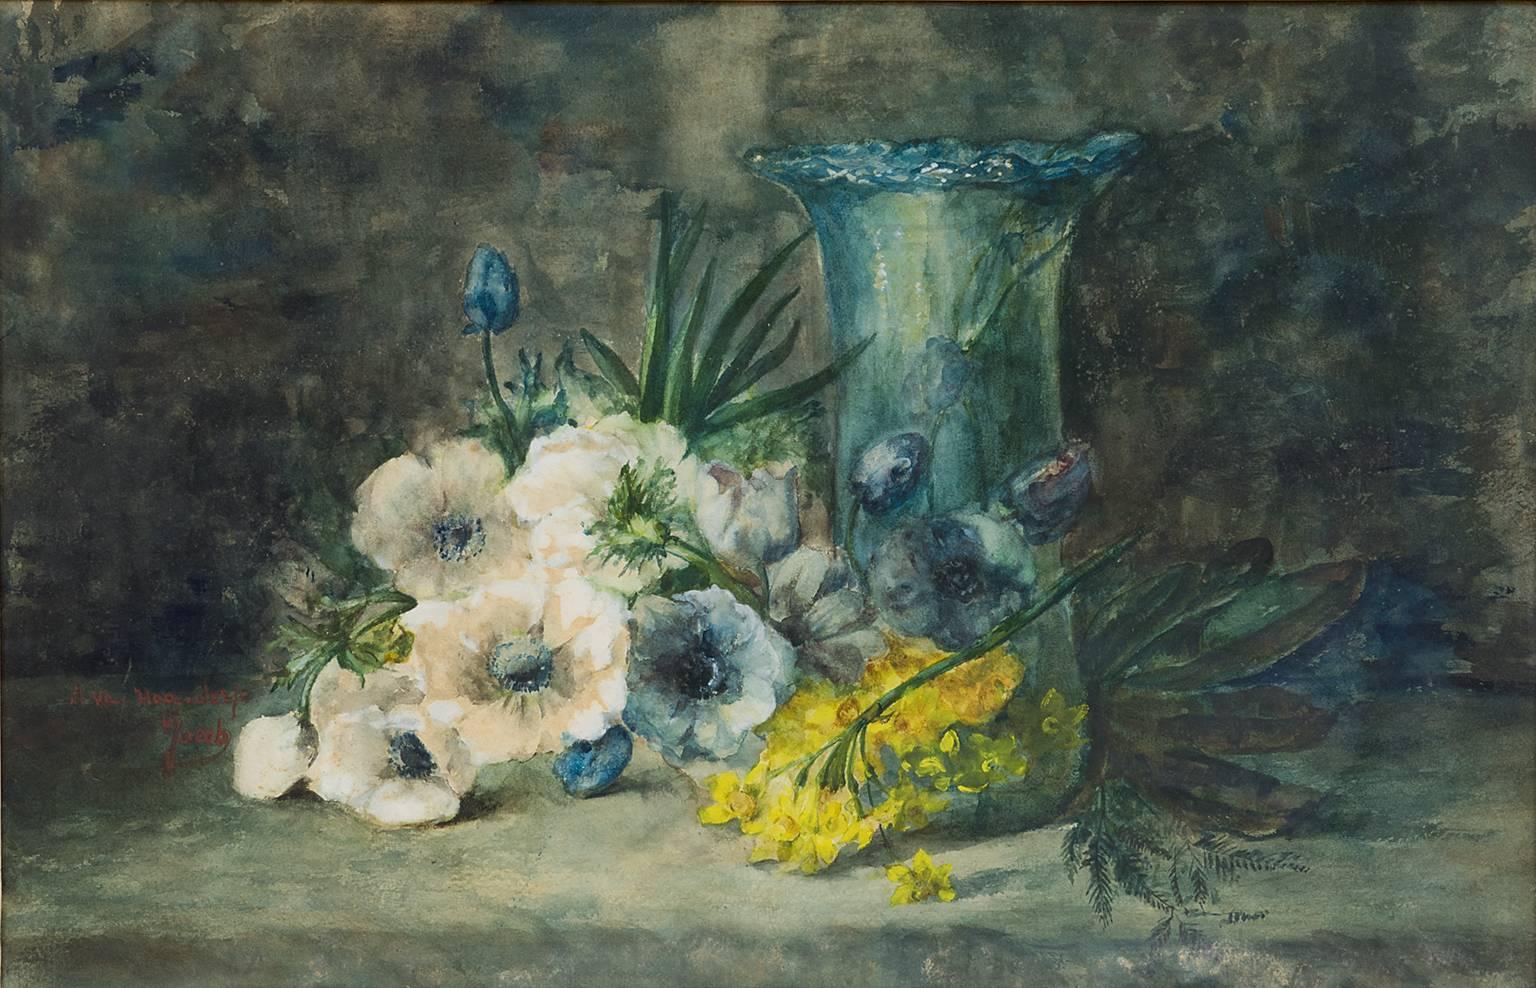 Flowers and a glass vase on a stone table - Painting by Adrienne Jacqueline Hogendorp-Jacob